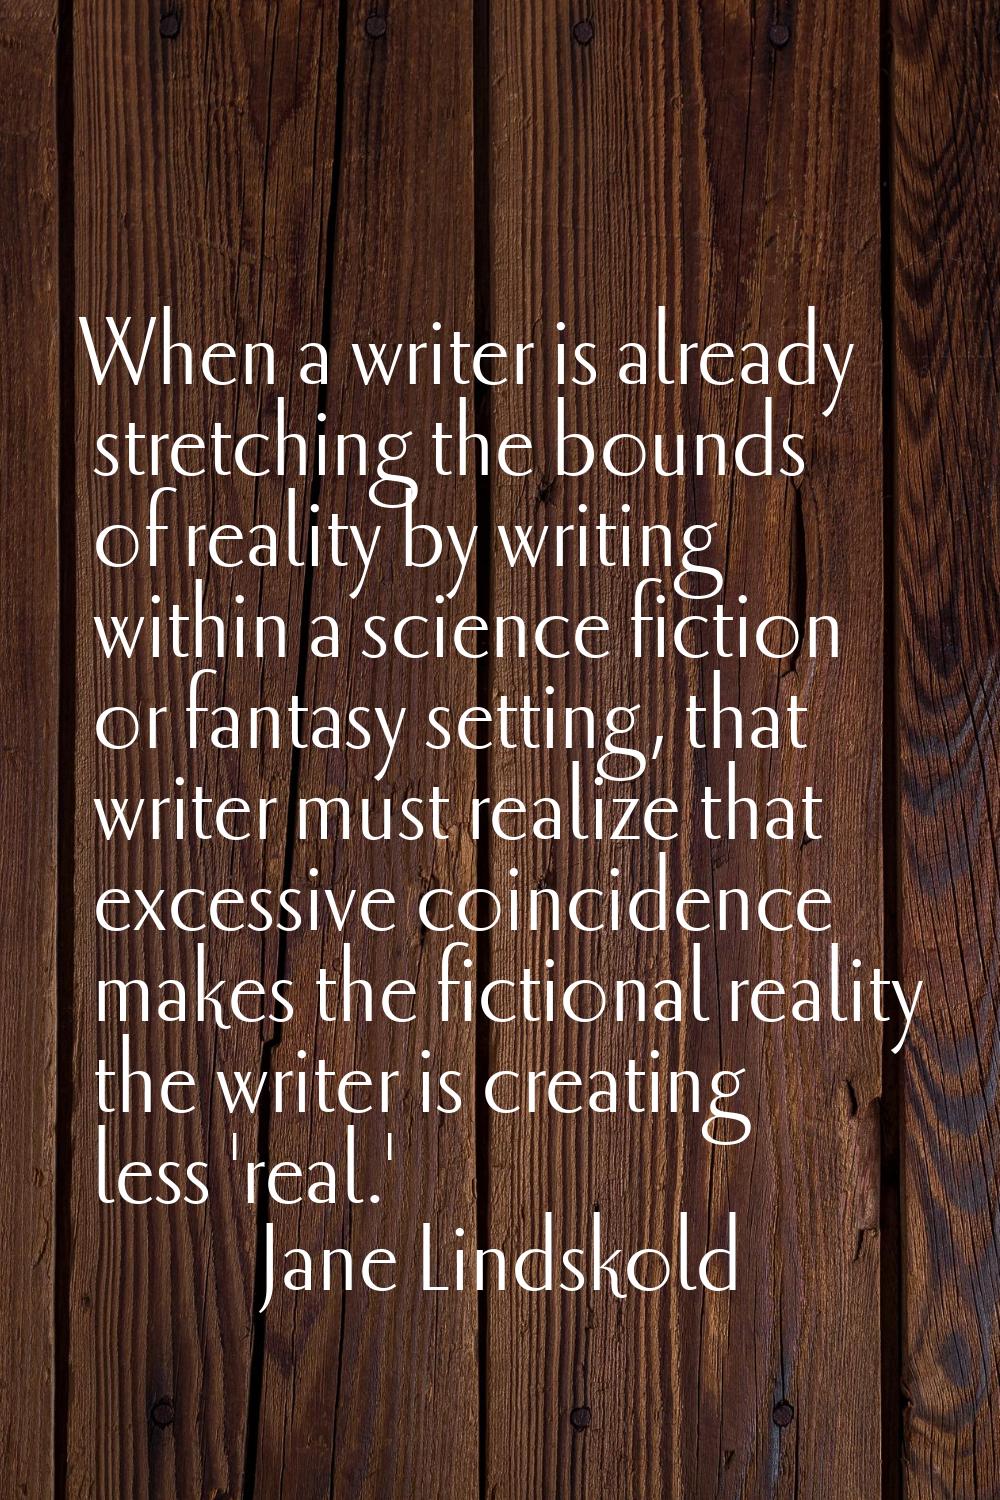 When a writer is already stretching the bounds of reality by writing within a science fiction or fa